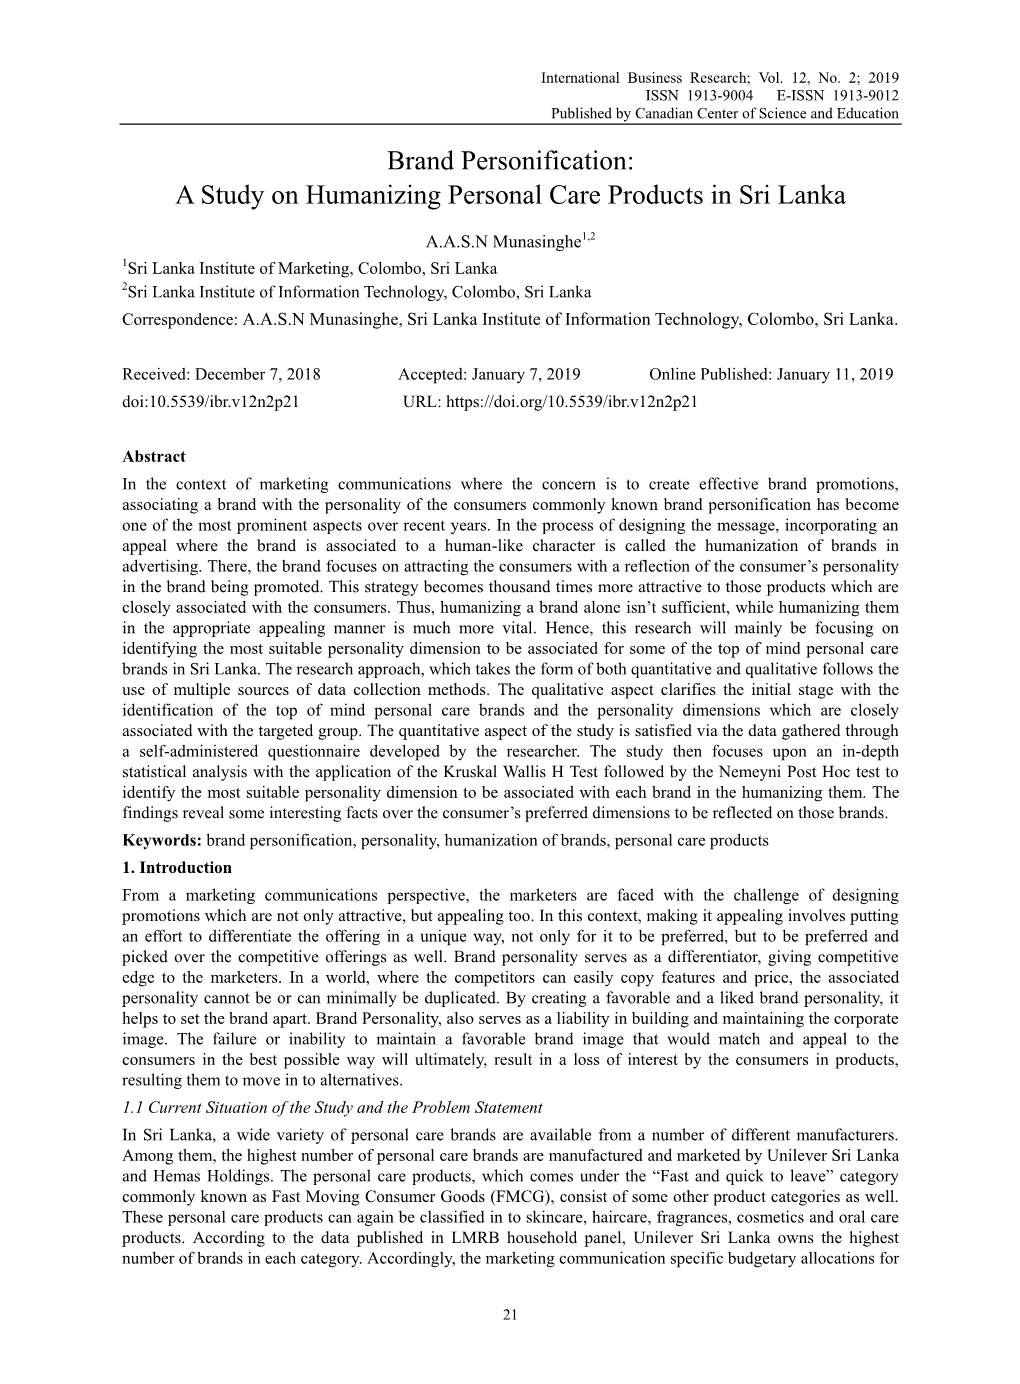 A Study on Humanizing Personal Care Products in Sri Lanka